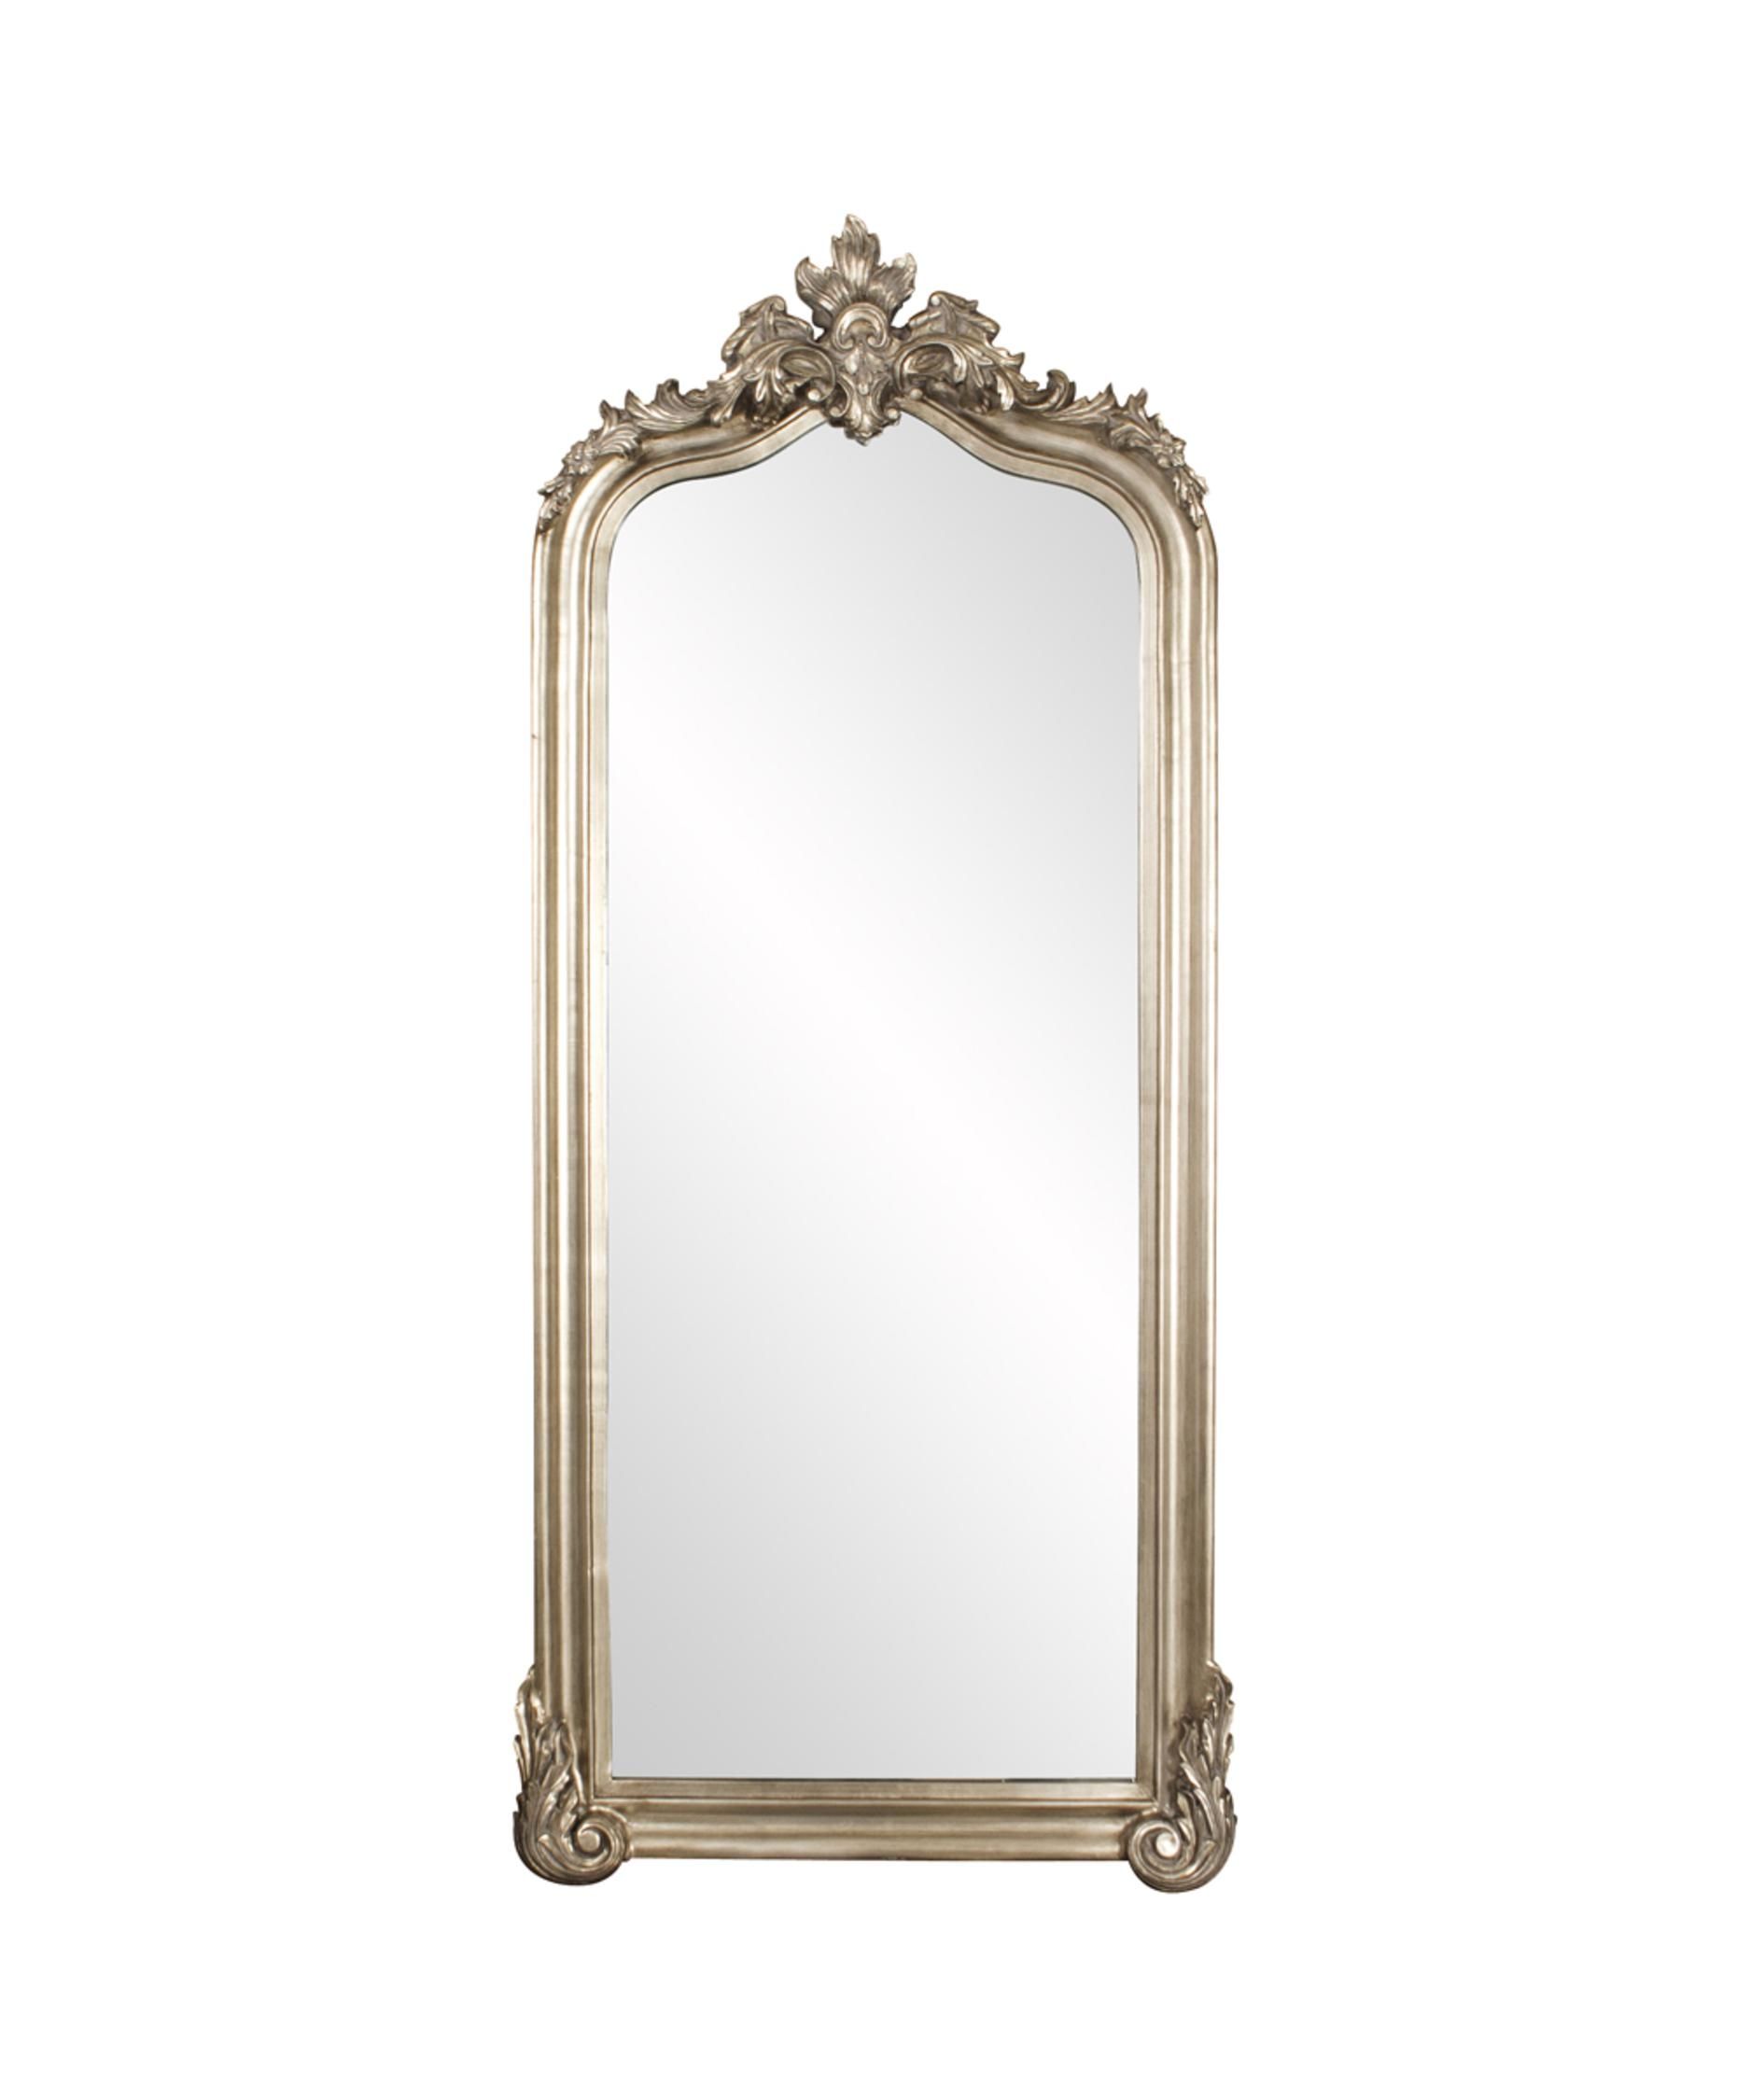 Where to Find Anthropologie's Popular Gleaming Primrose Mirror for 